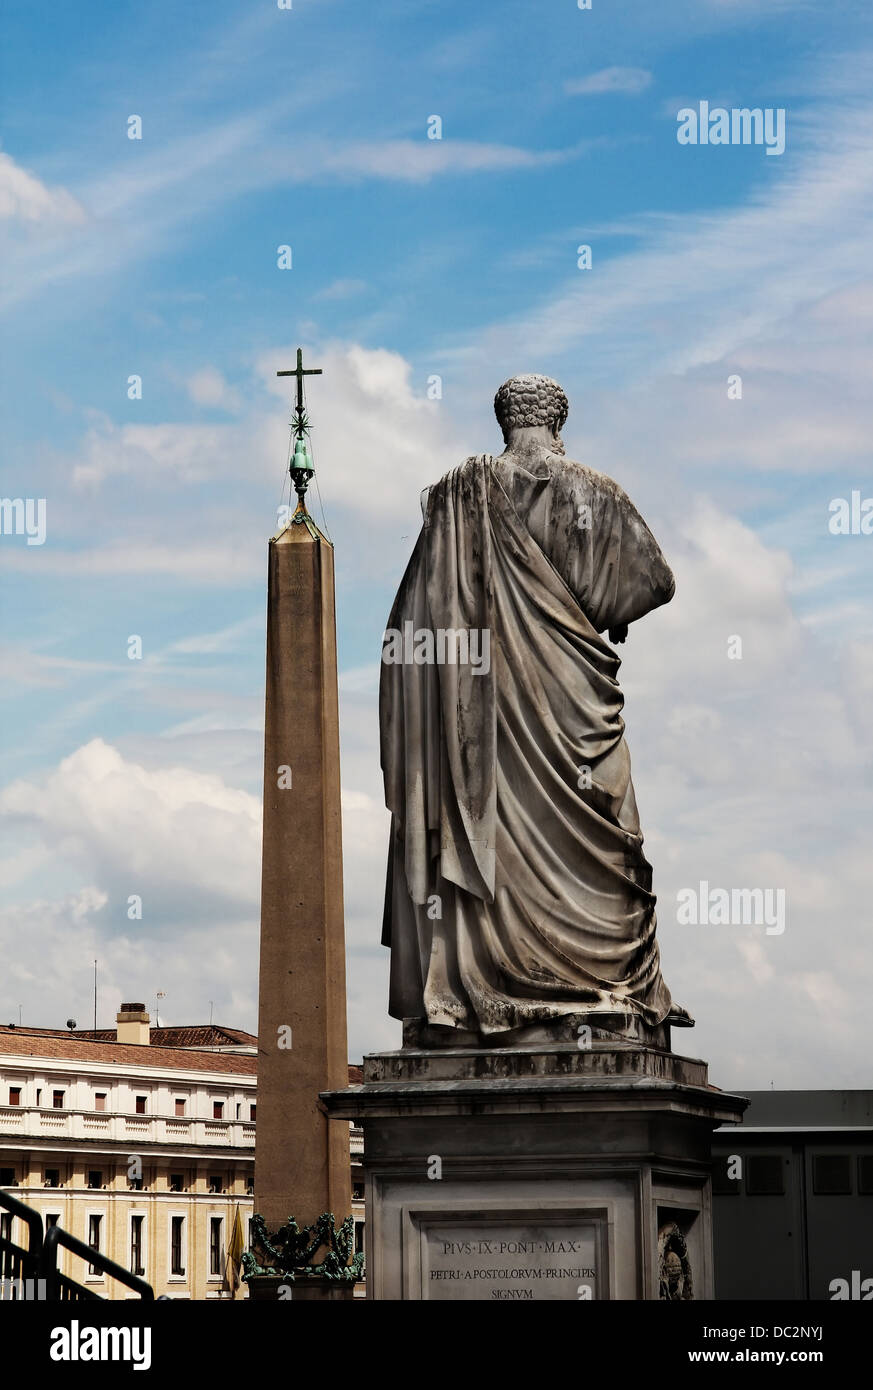 Statue of Saint Peter and obelisk on Saint Peter's square, back view, in Vatican city, Italy Stock Photo